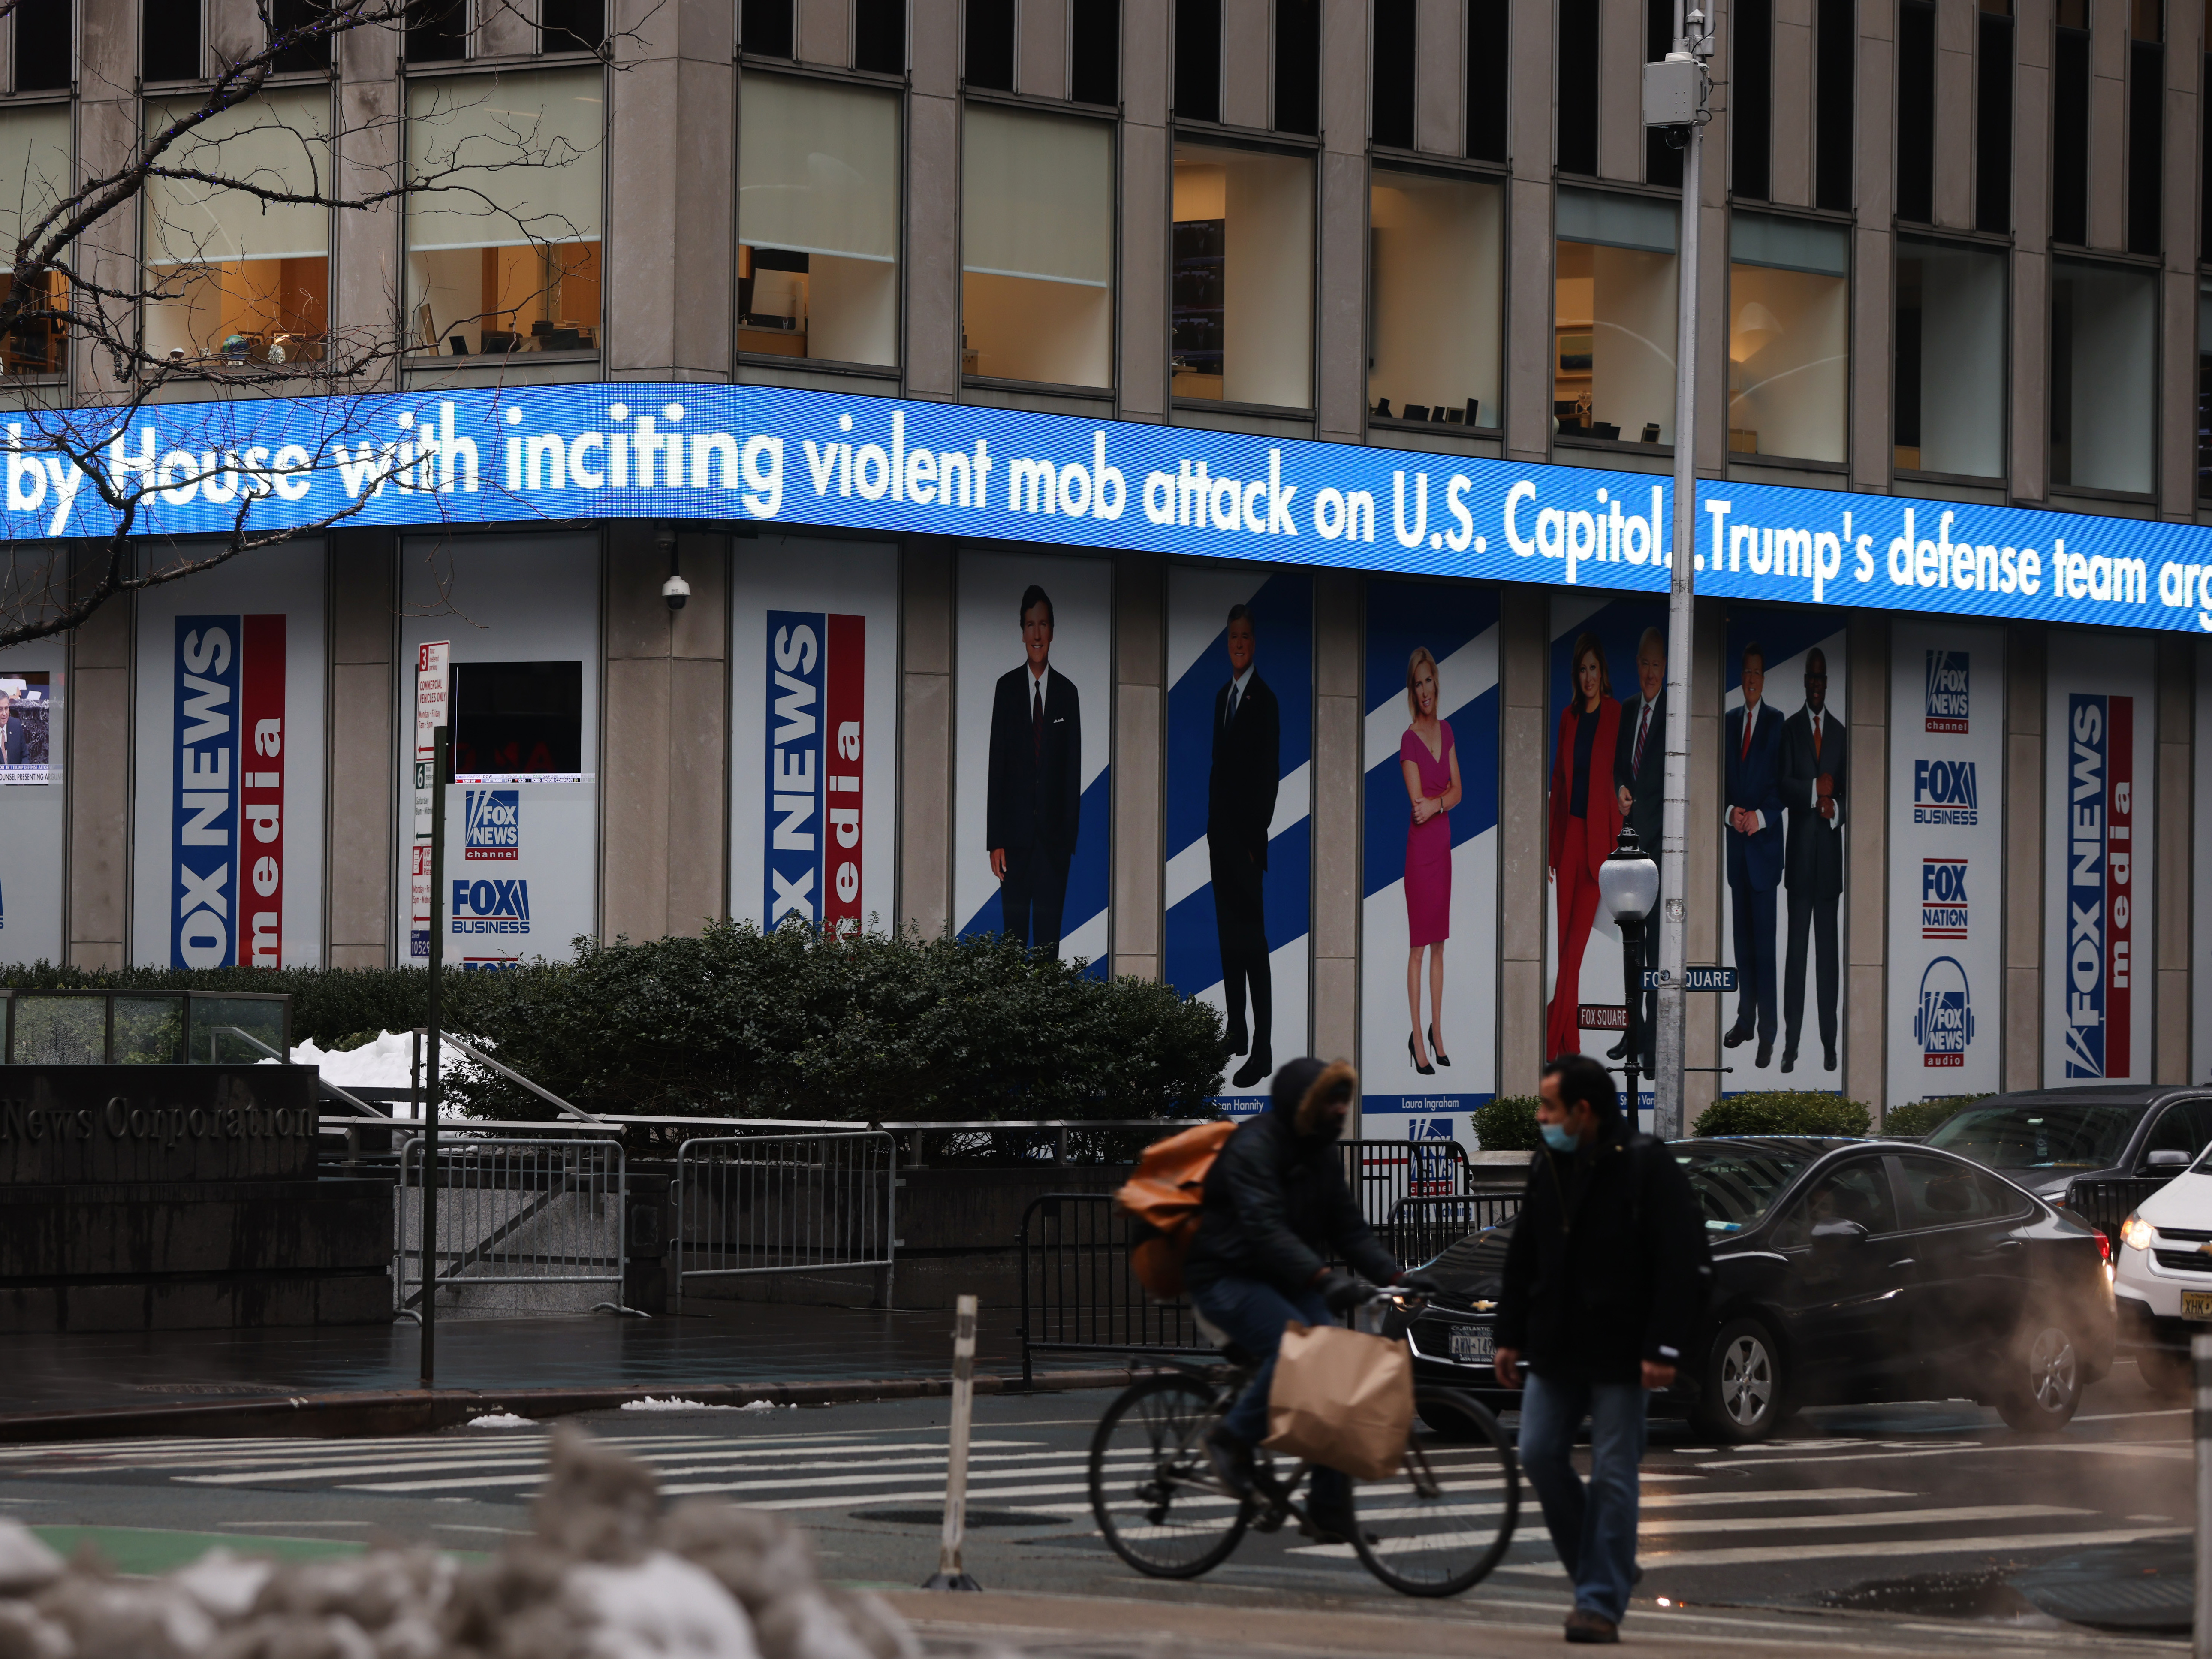 News headlines on the impeachment trial of Donald Trump are displayed outside Fox headquarters in February in New York City. Spencer Platt/Getty Images